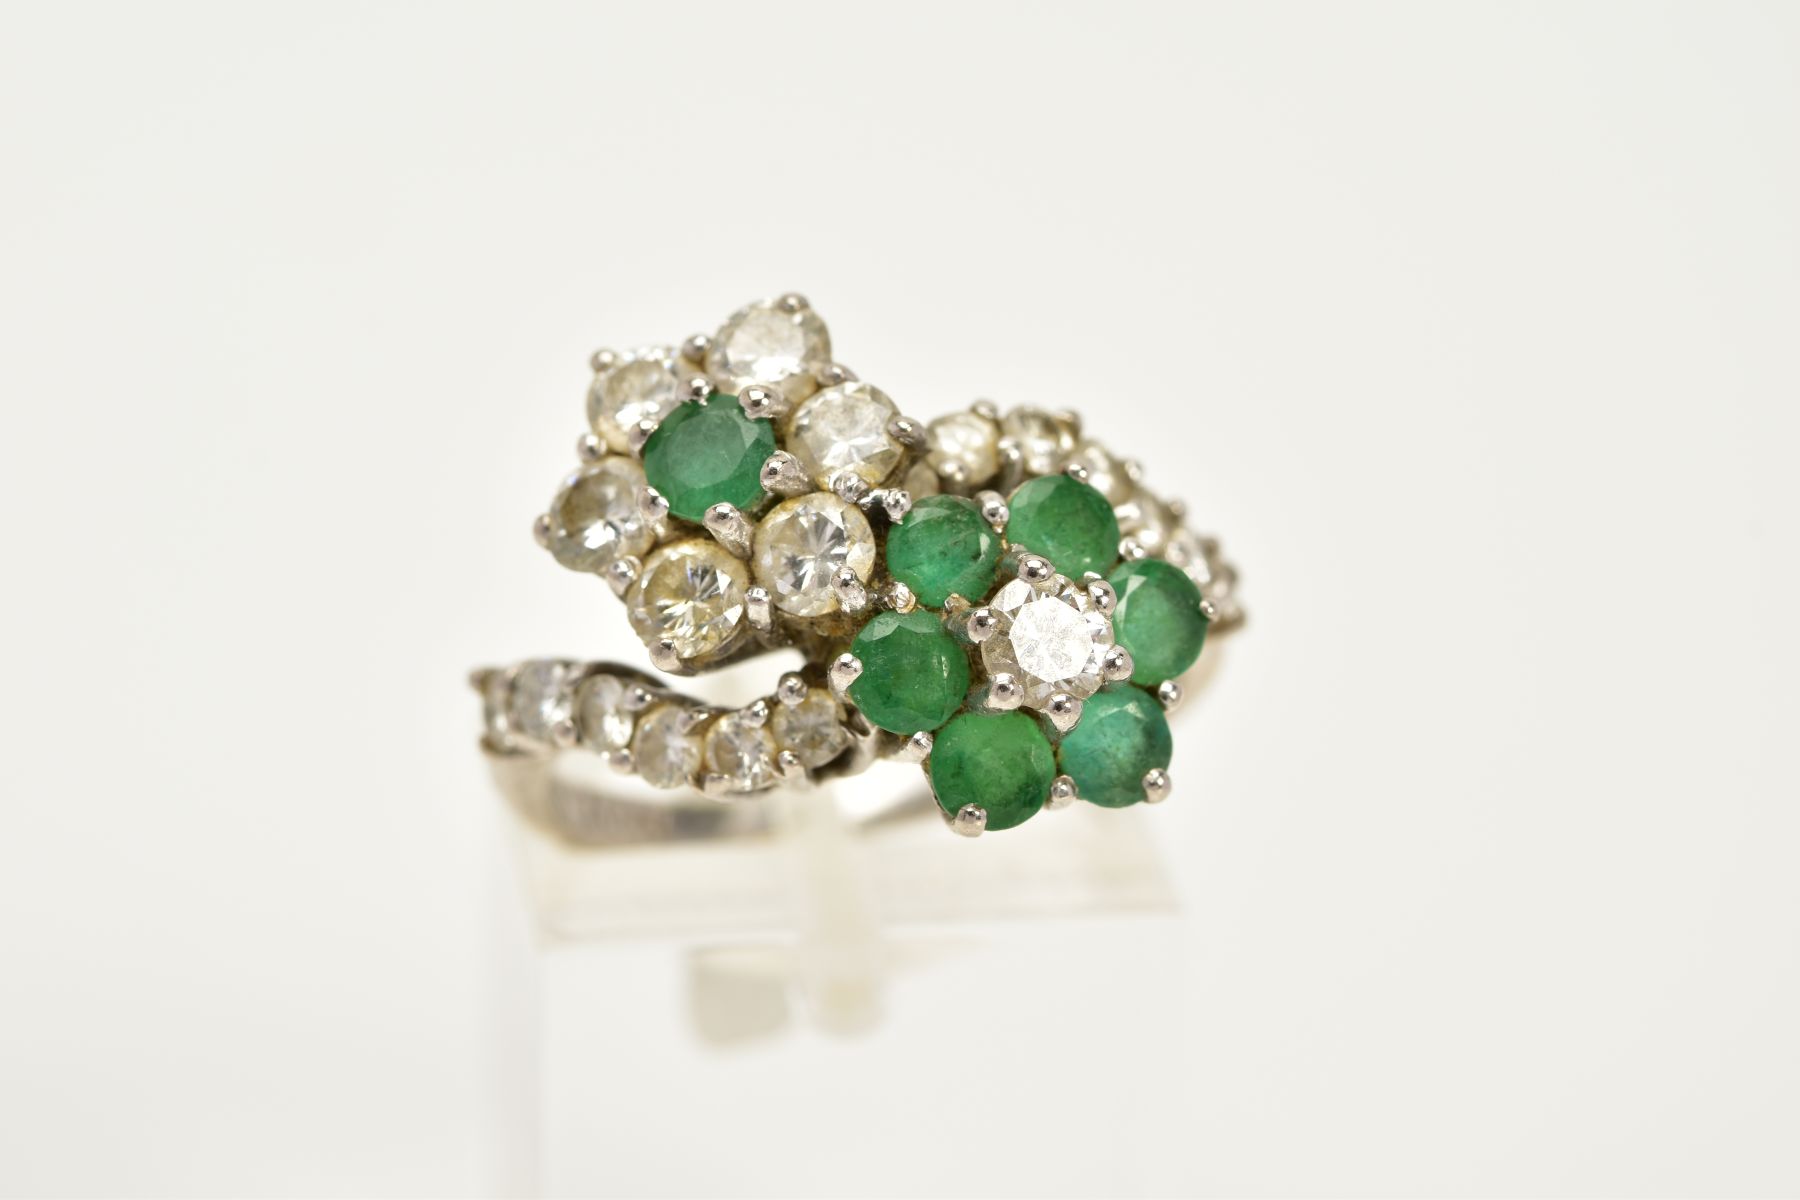 A DIAMOND AND EMERALD CROSSOVER RING, the white metal ring of crossover design, in the form of two